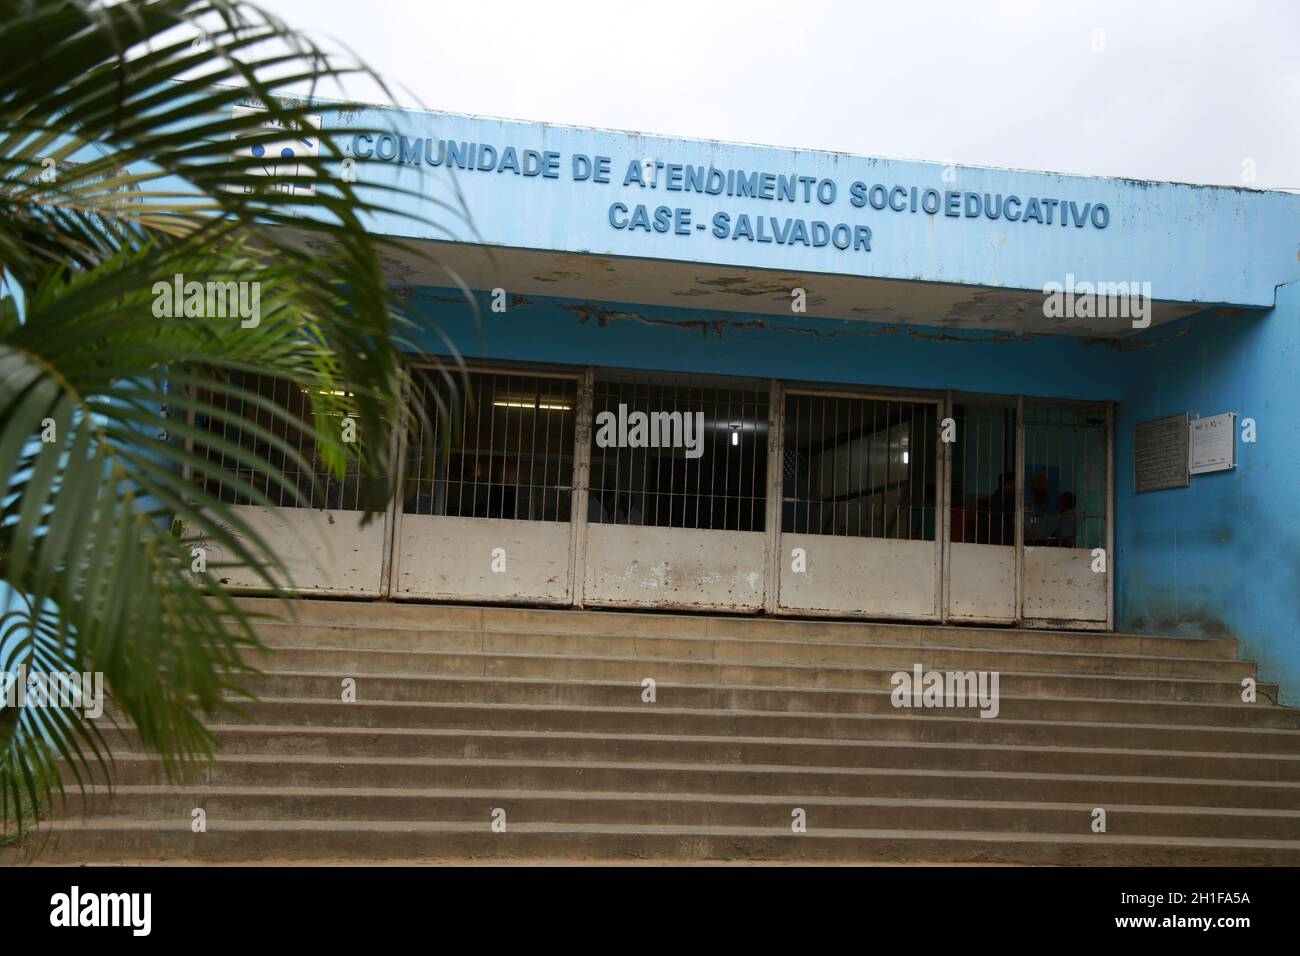 salvador, bahia / brazil - august 6, 2015: Facade of the Case Studies Community in Salvador. The site is home to teenage offenders. *** Local Caption Stock Photo